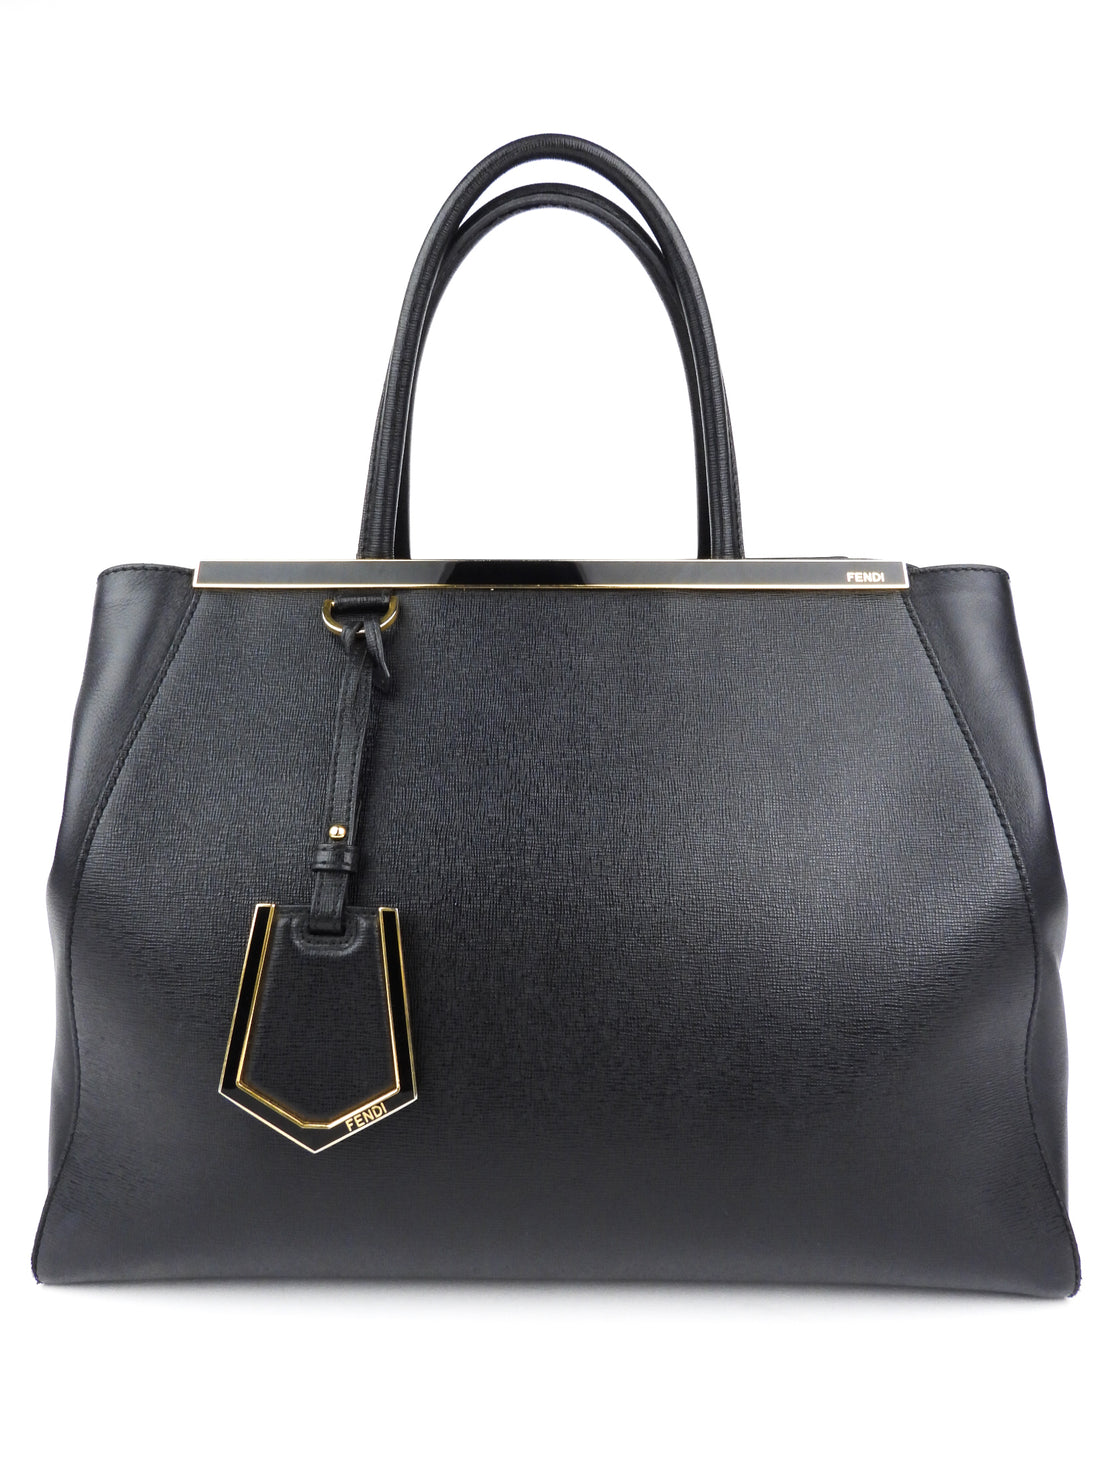 Fendi Black Leather 2Jours Two Way Tote Bag